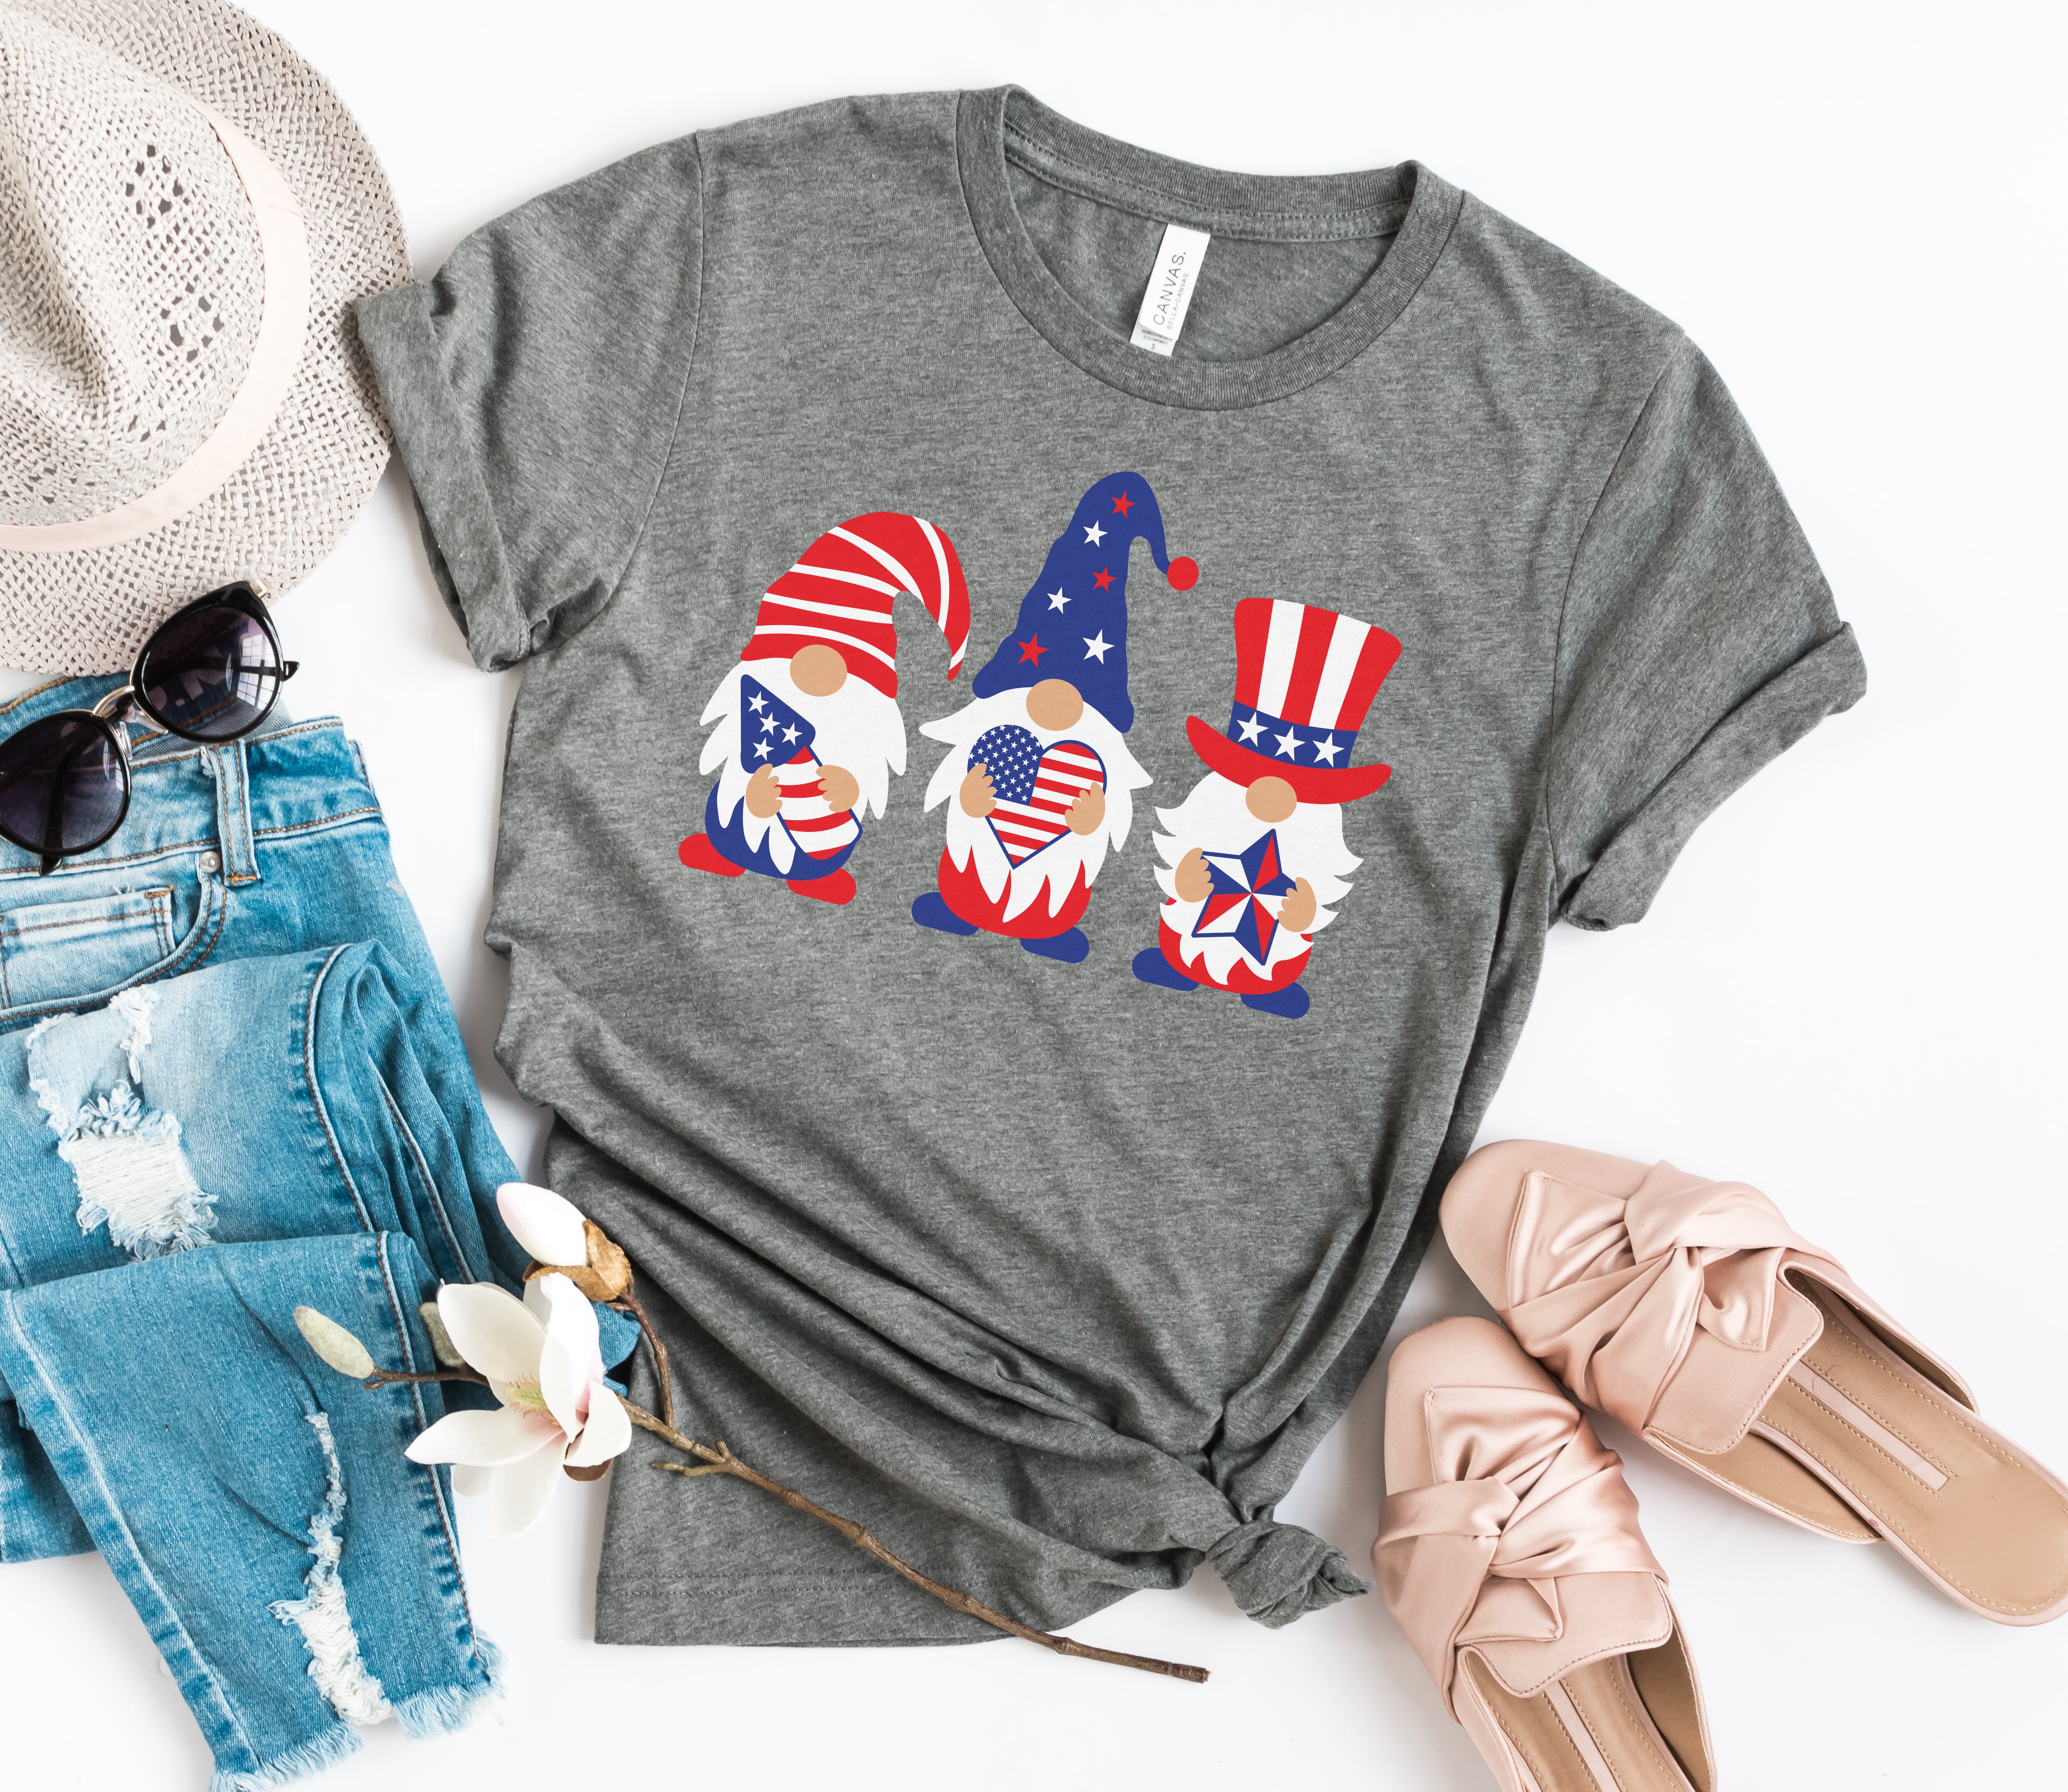 RYRJJ On Clearance 4th of July Cute Gnomes Tops for Women American Flag  Patriotic Shirts Summer Short Sleeve Independence Day Graphic Tee 01#Black  L 